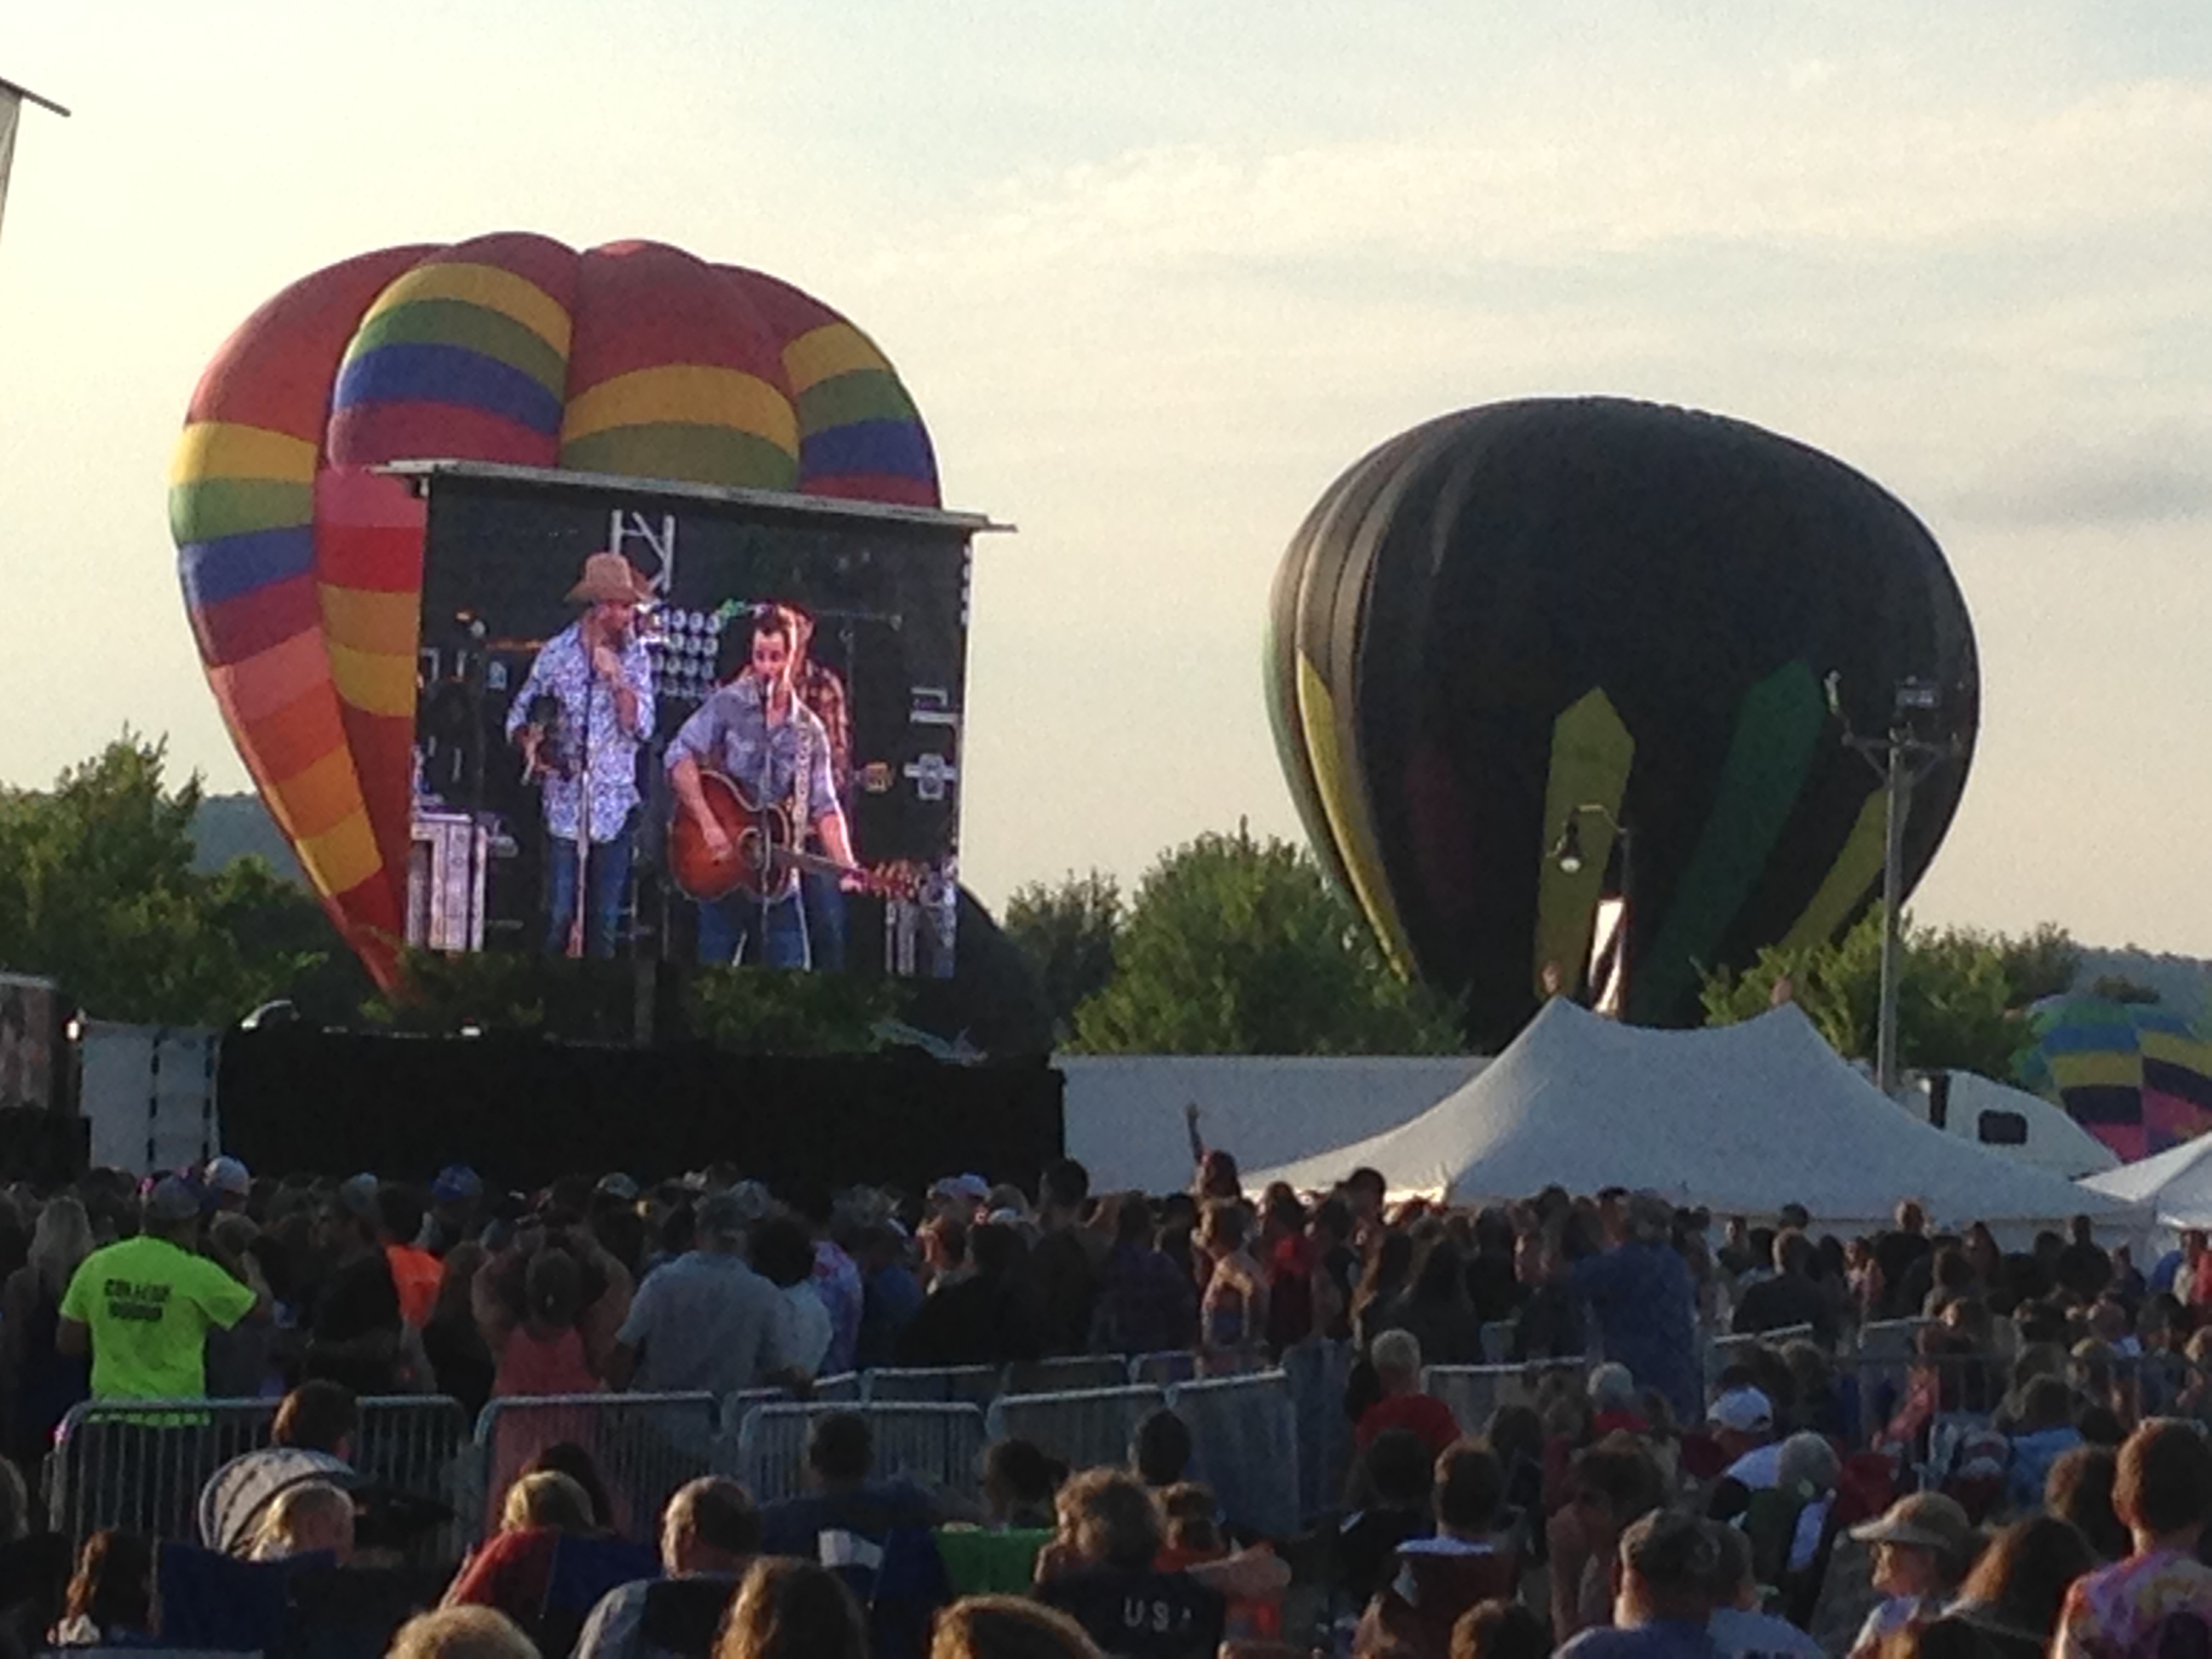 led video screen rentals for outdoor events in midwest